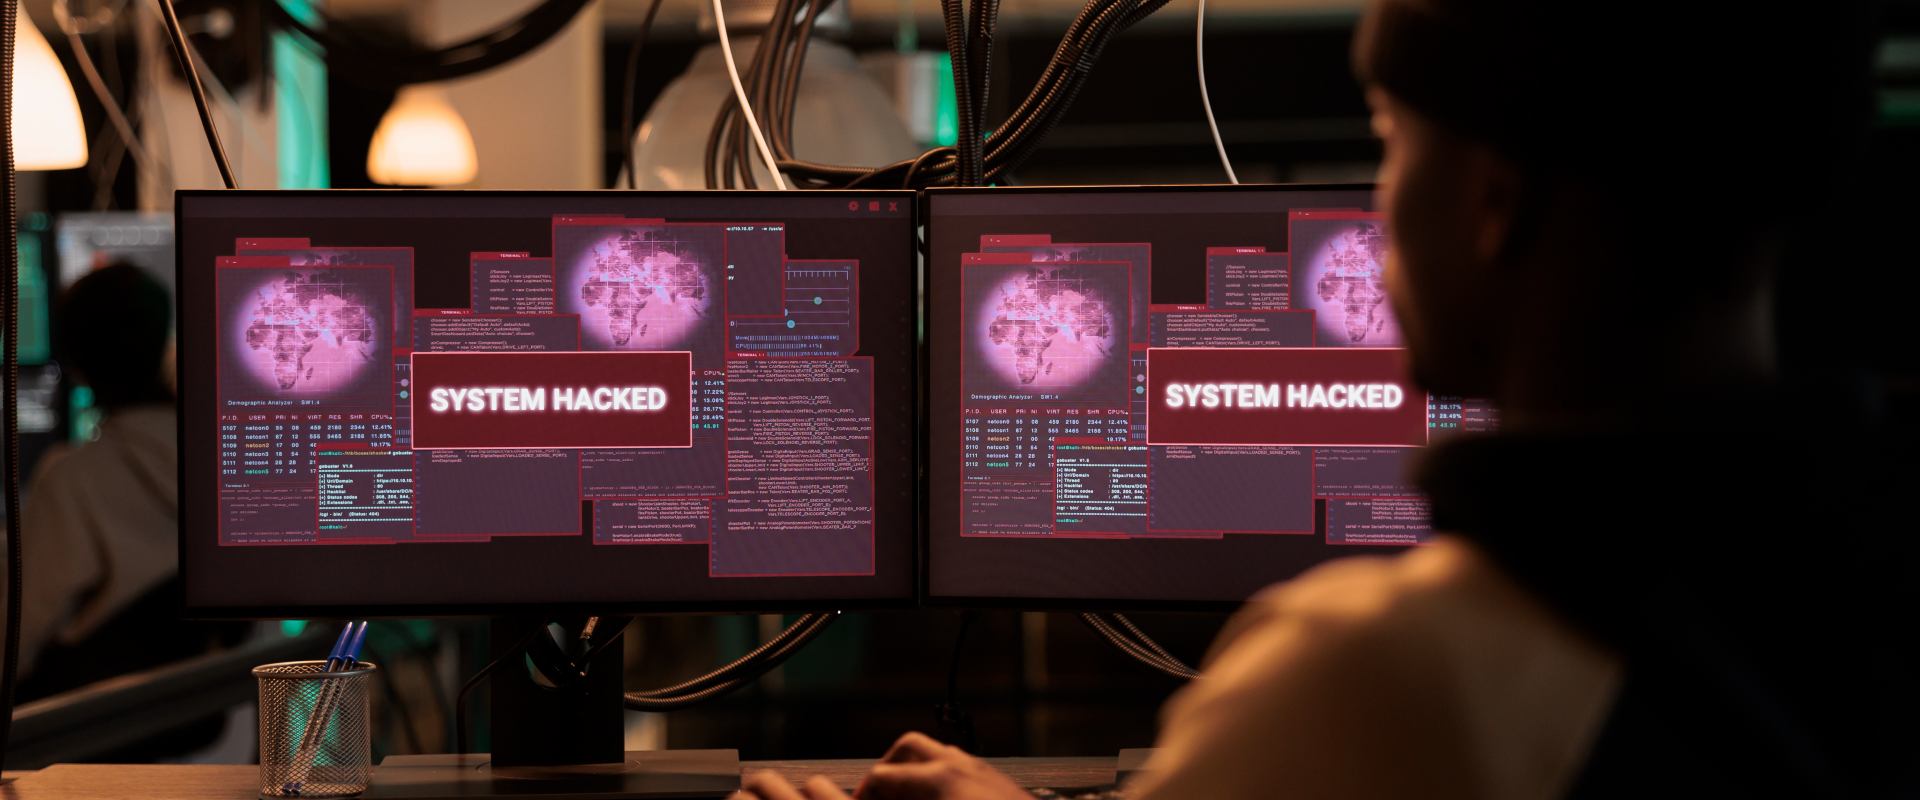 wallpaper on monitors showing a cyber attack